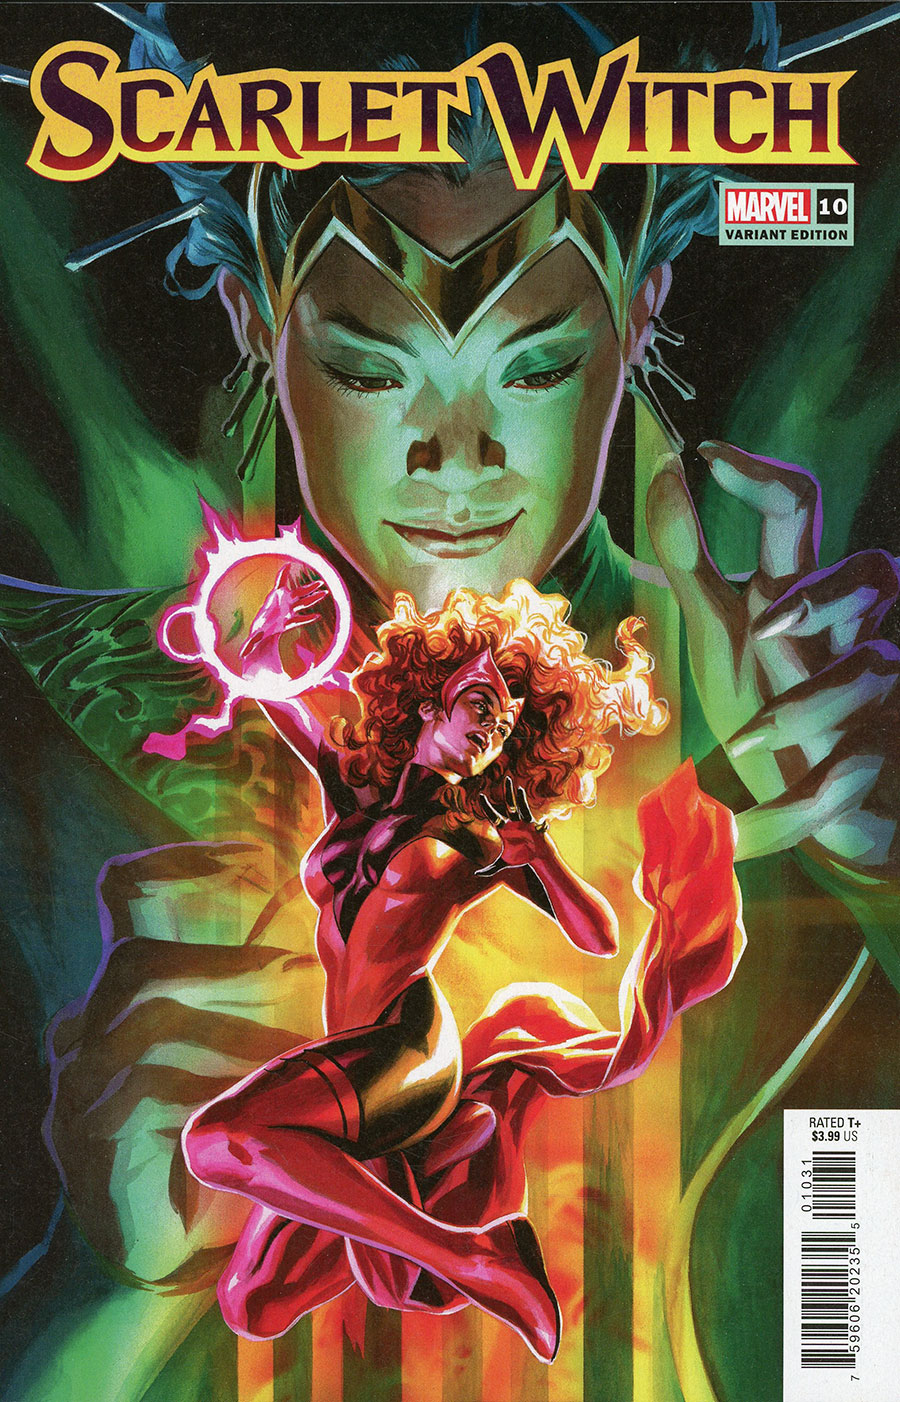 Scarlet Witch Vol 3 #10 Cover C Variant Felipe Massafera Cover